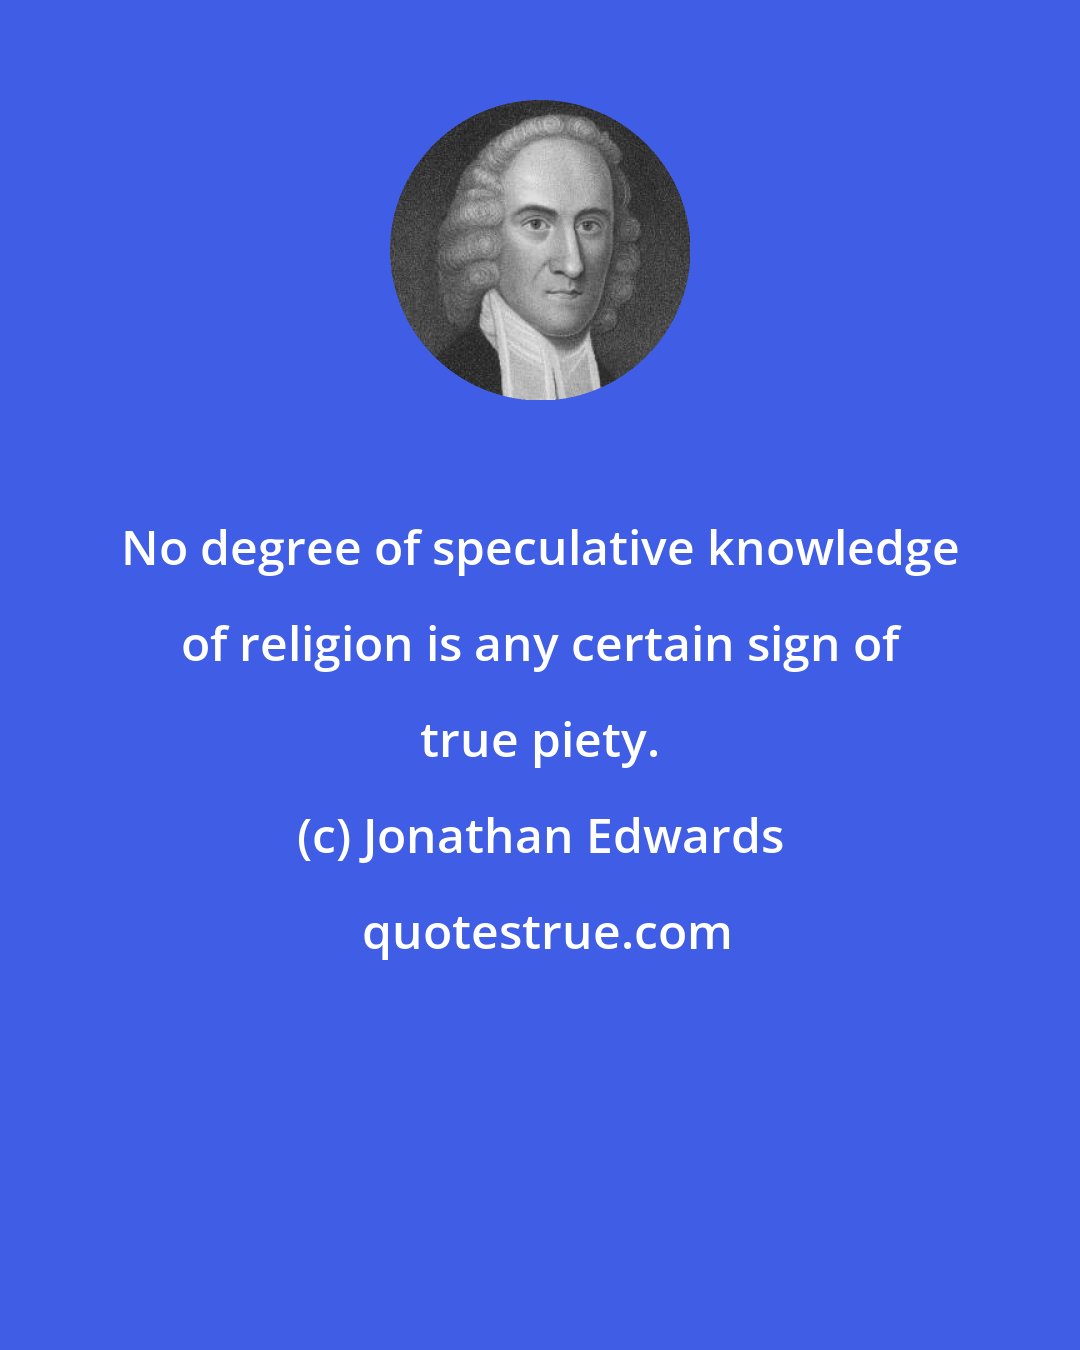 Jonathan Edwards: No degree of speculative knowledge of religion is any certain sign of true piety.